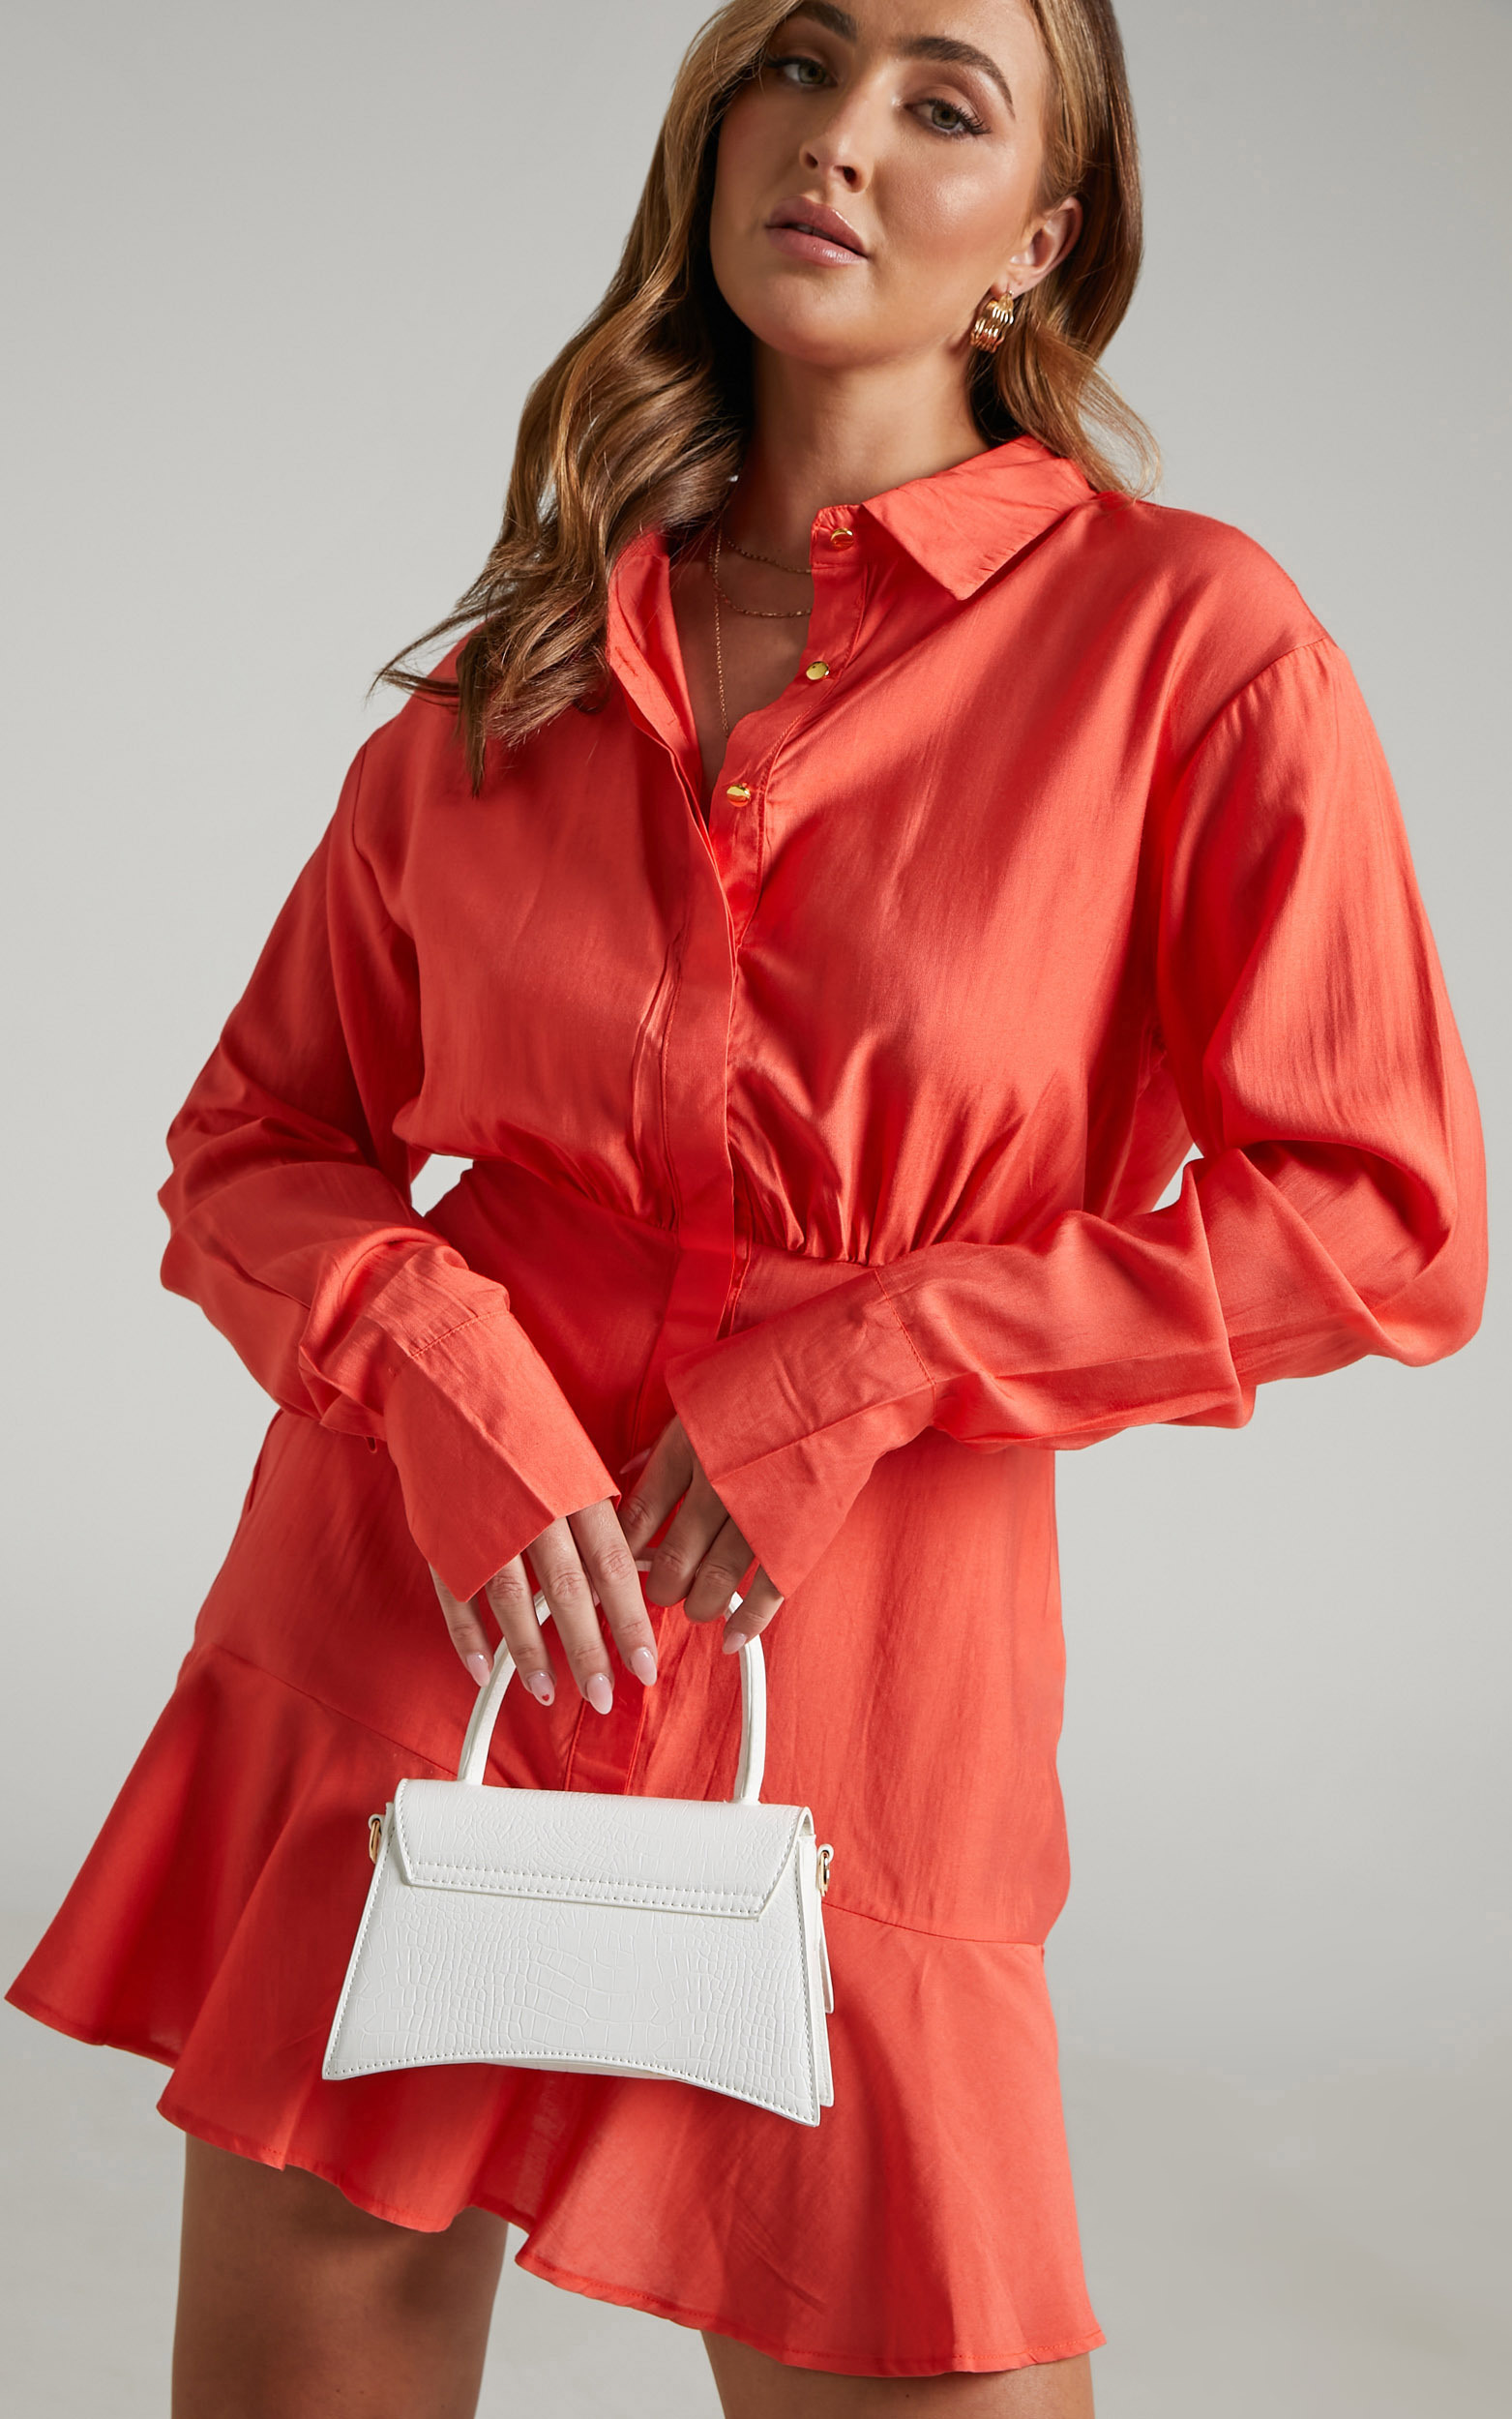 Jervin Collared Button Down Mini Shirt Dress in Oxy Fire - 06, RED1, hi-res image number null